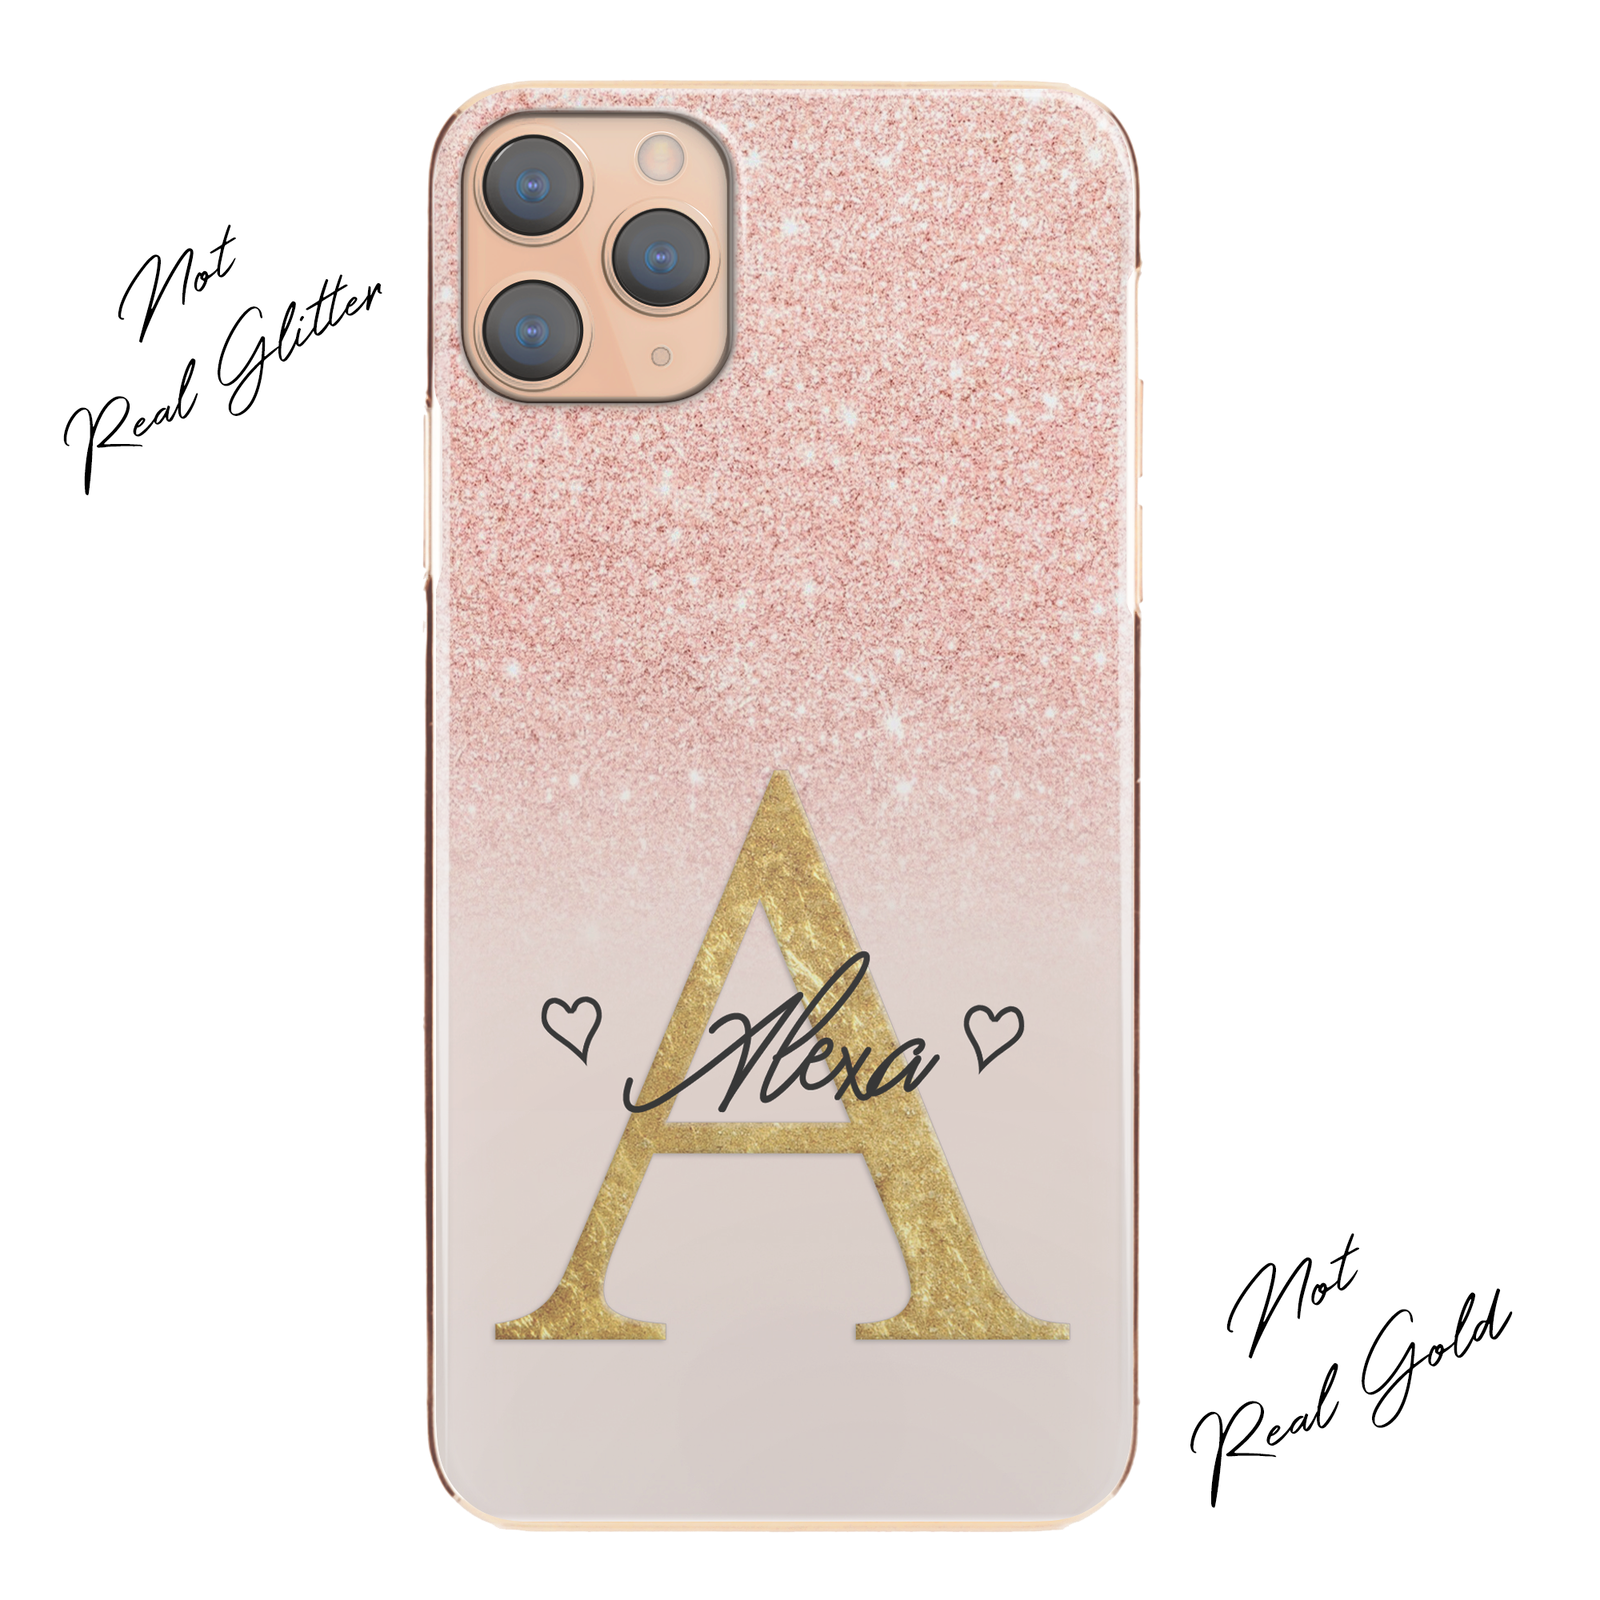 Personalised Phone Case For iPhone 12 Pro Max , Initial Grey/Pink Marble Hard Cover